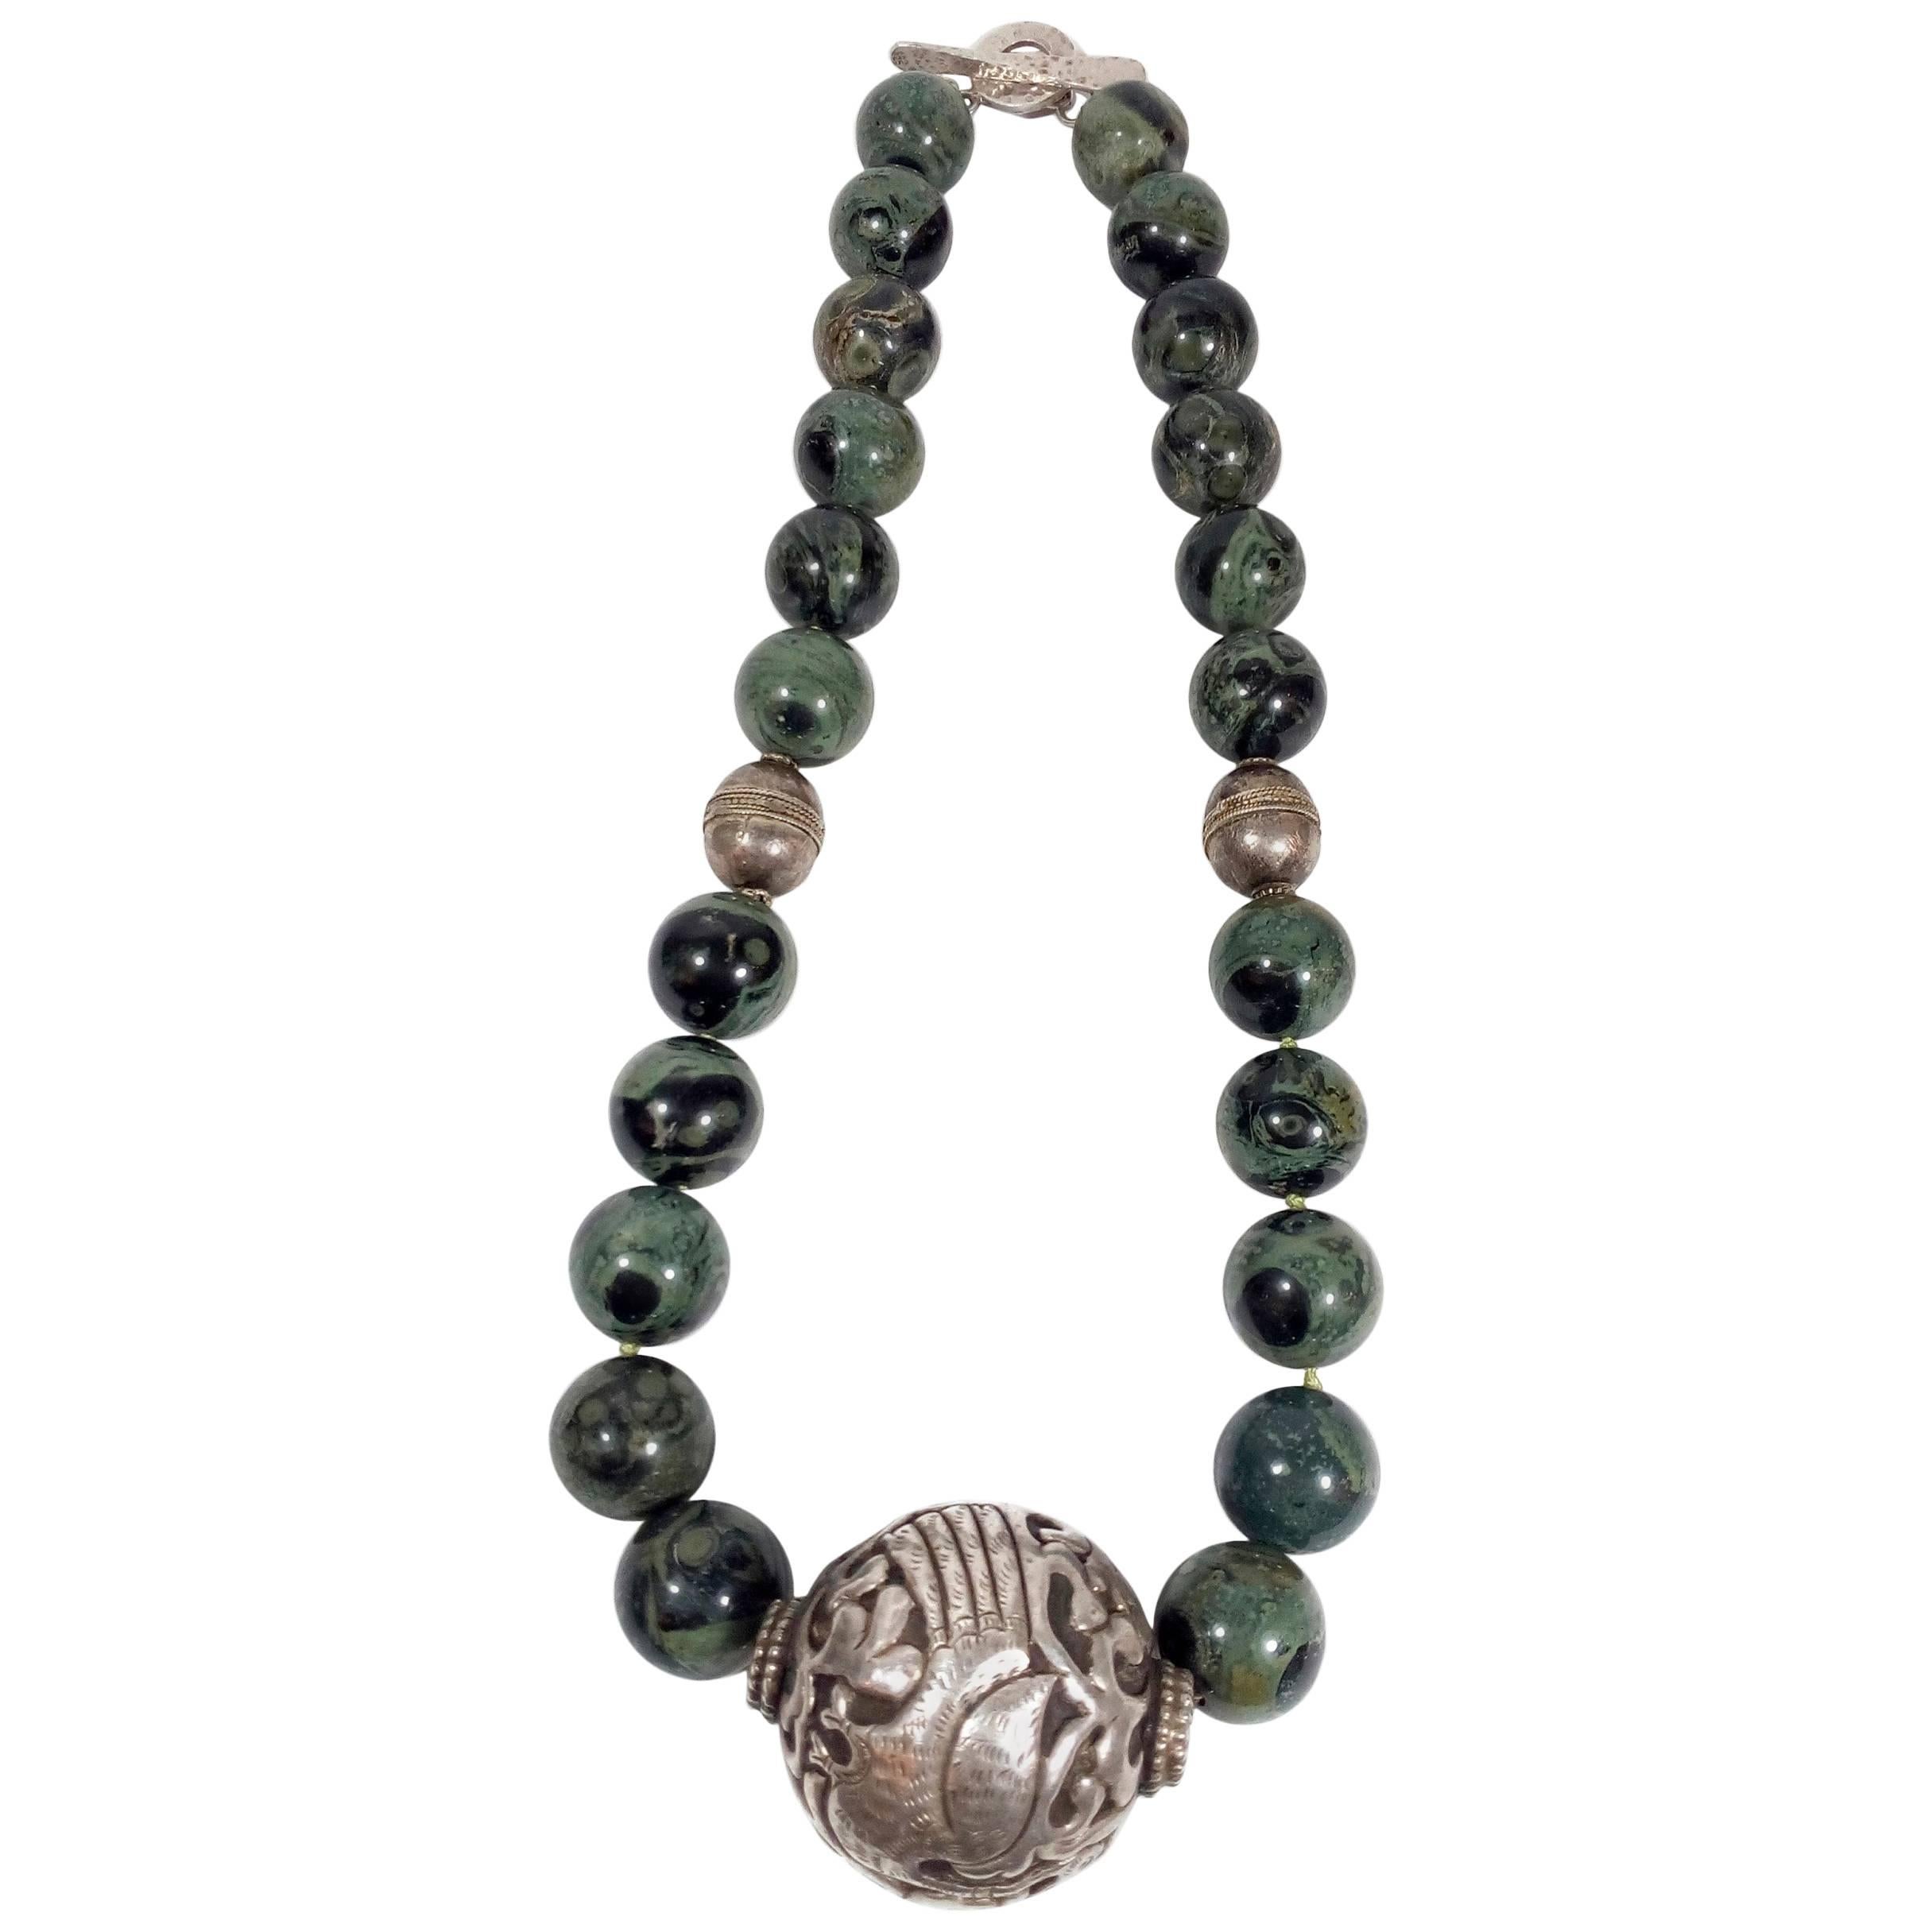 Large Mexican Silver and Serpentine Stone Vintage Necklace